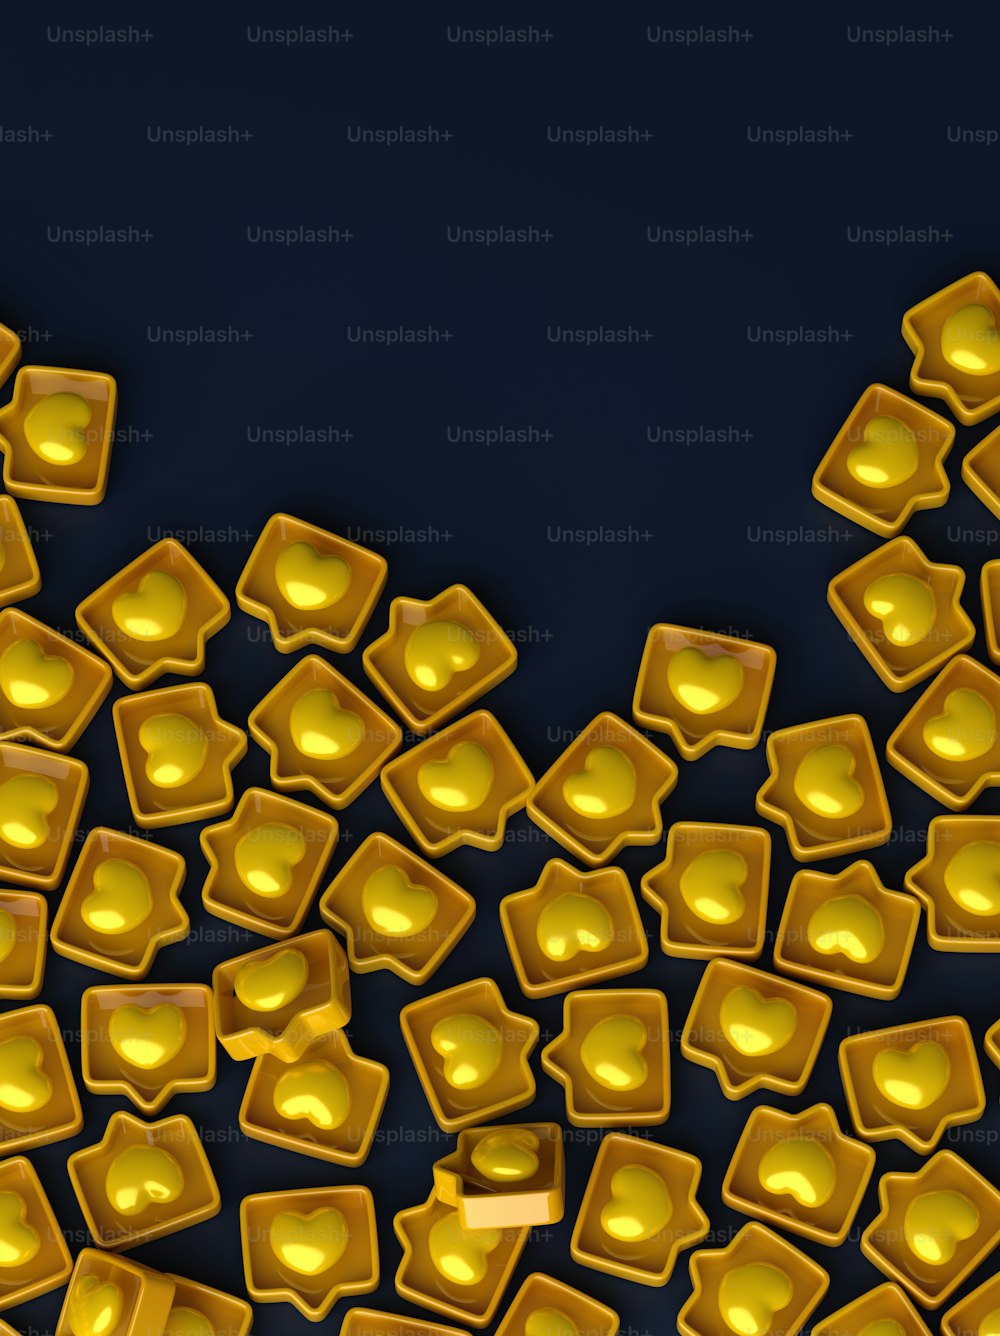 a bunch of yellow square objects on a black background